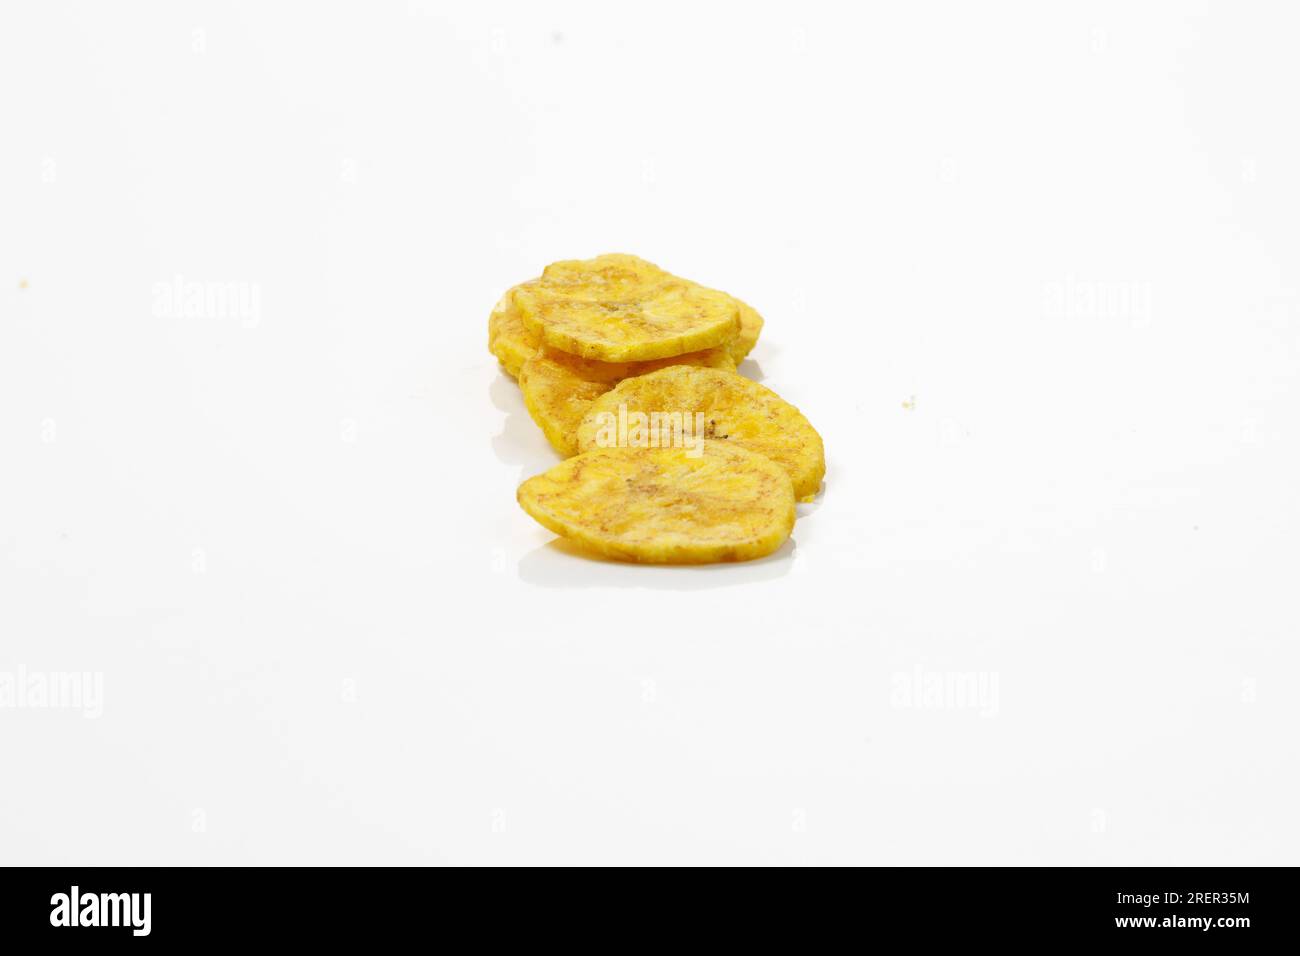 Kerala chips or Banana chips, cult snack item of Kerala,Isolated image with white background Stock Photo